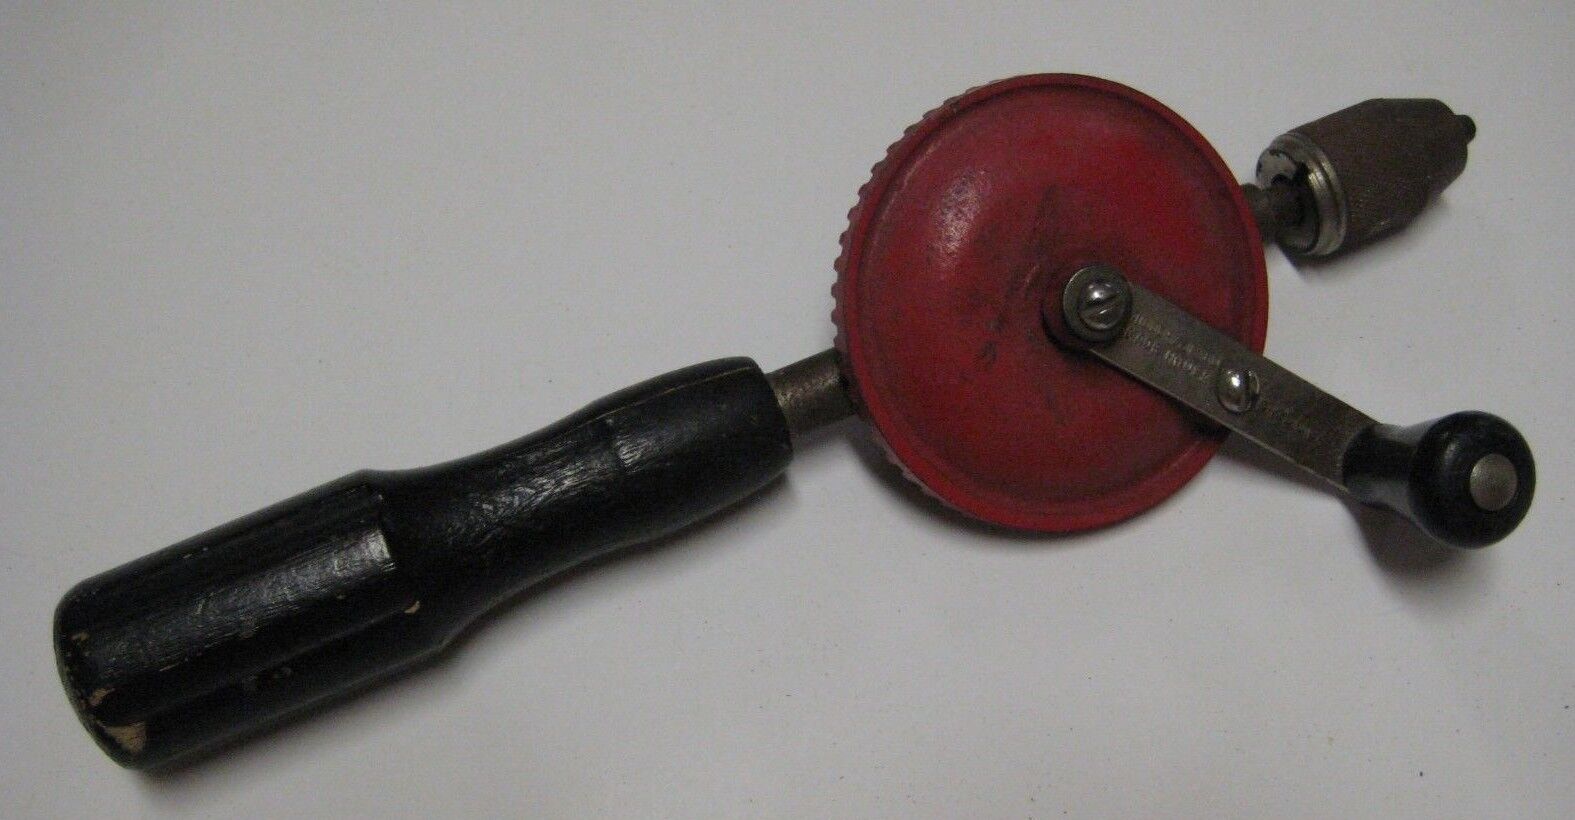 Vintage Antique MILLERS FALLS Single Speed Hand Drill Egg Beater Tool No. 25000